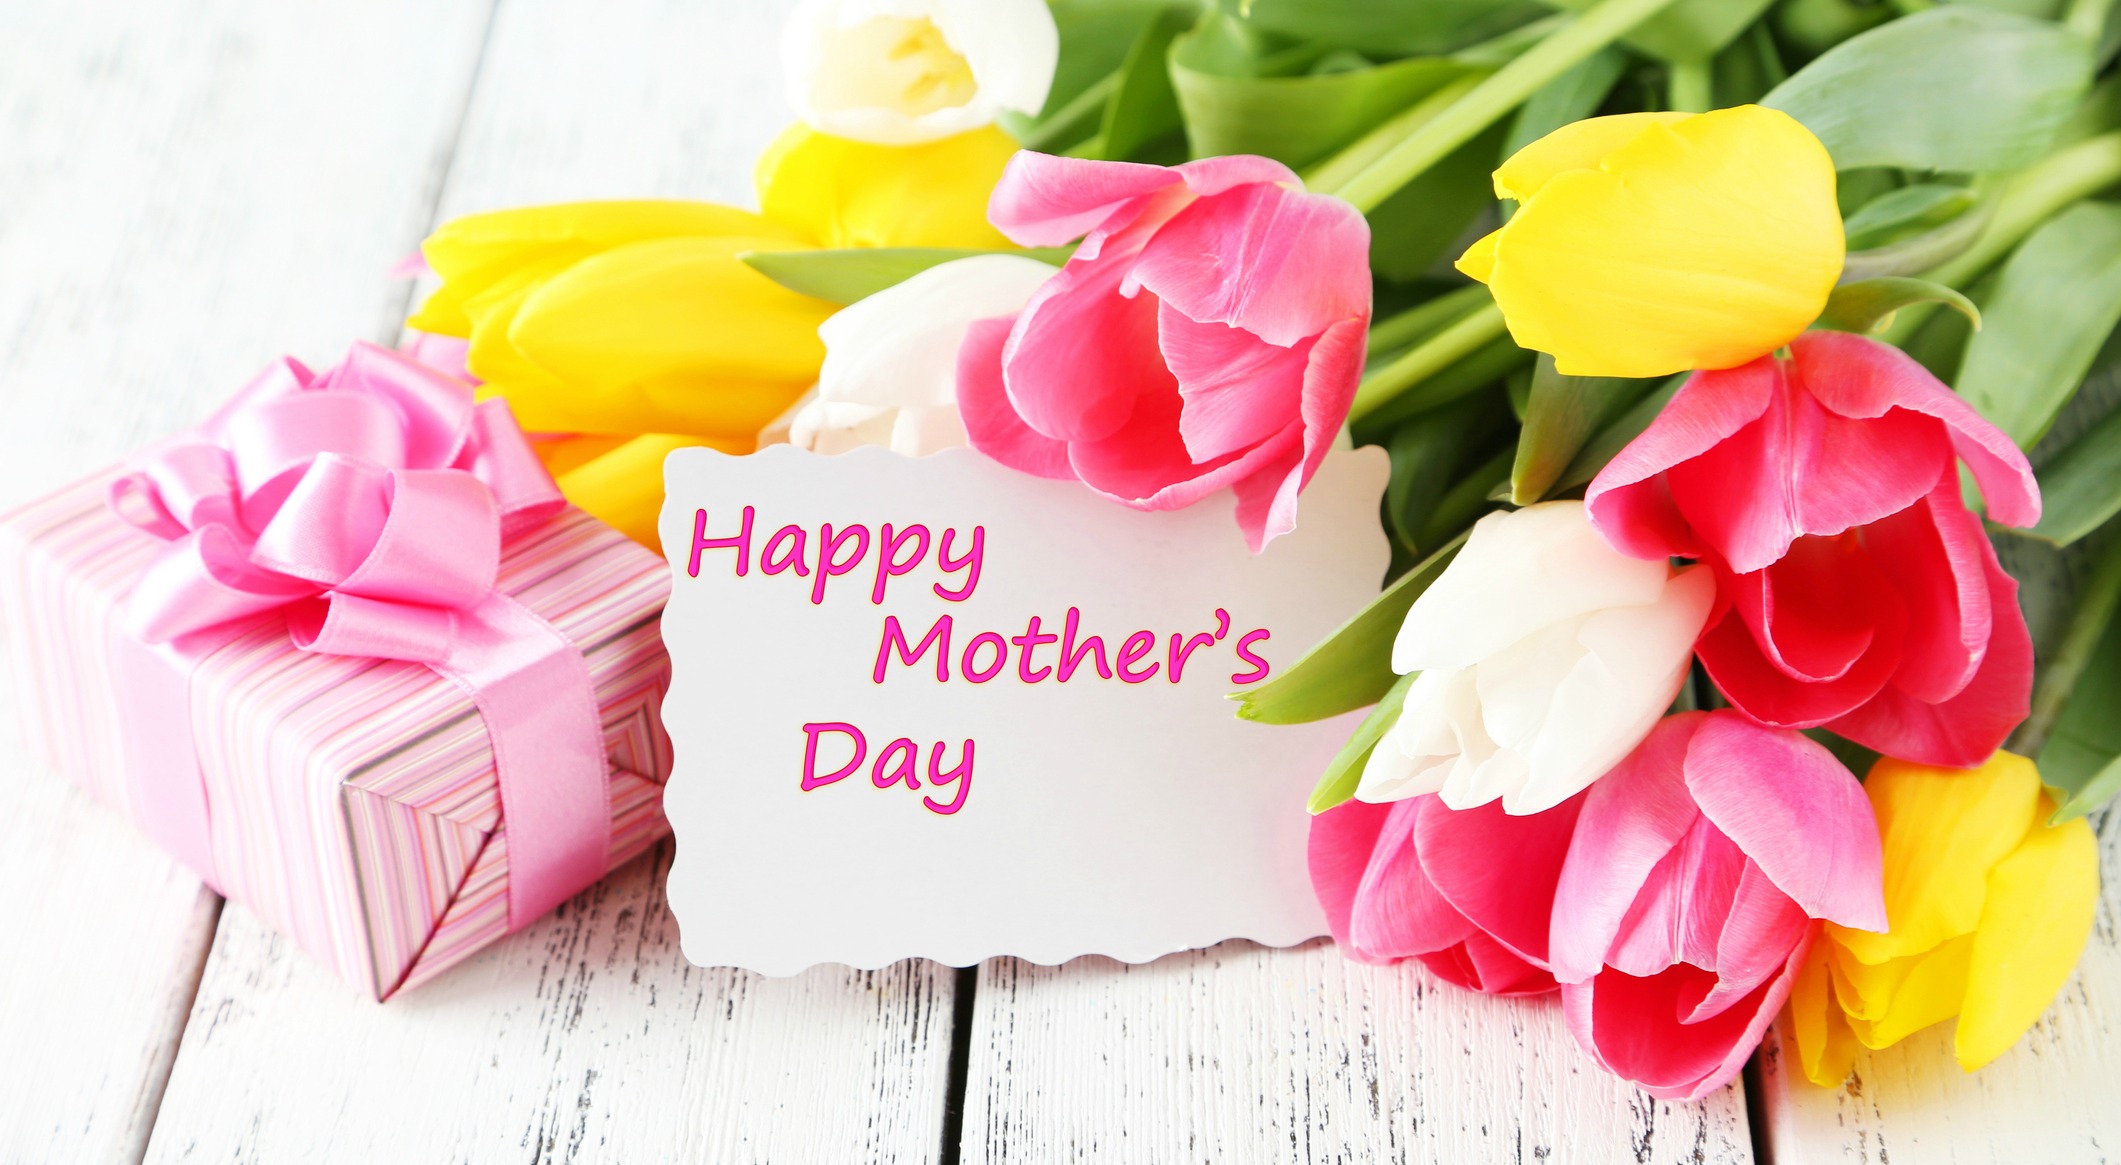 11 Fun Facts for Mother's Day - Eastern Floral